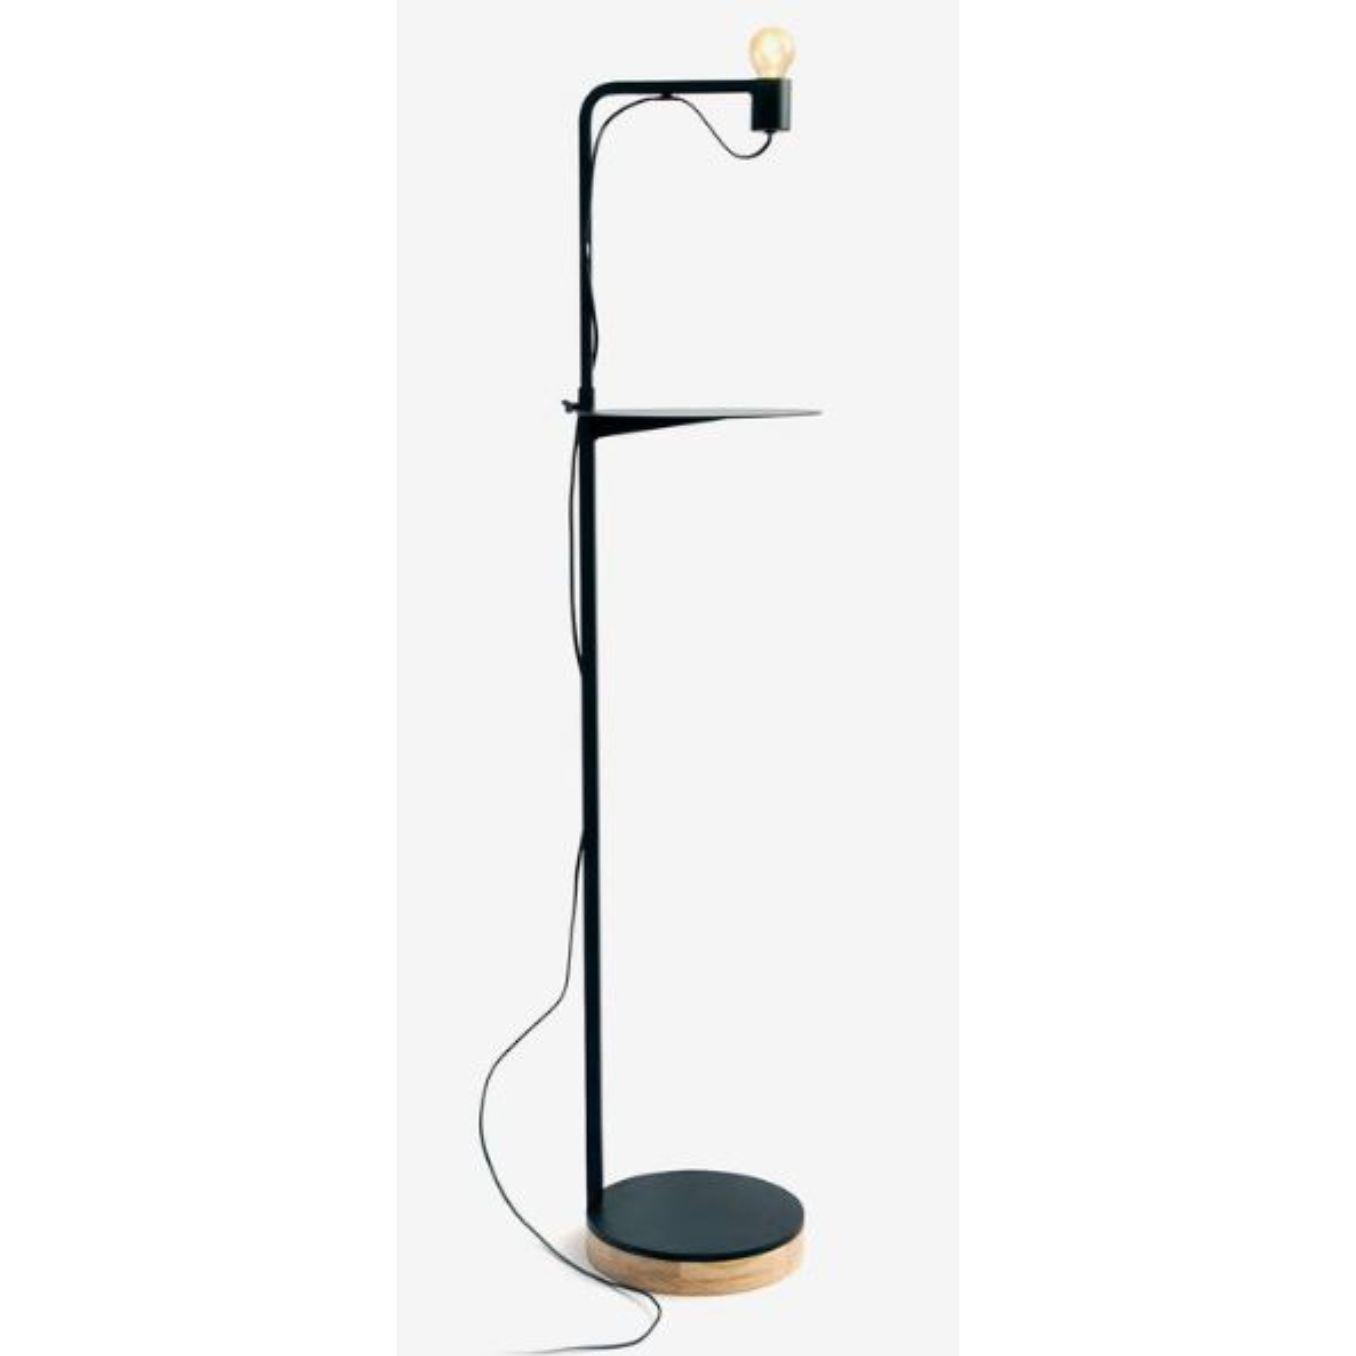 Grafit floor lamp with shelf by RADAR
Design: Bastien Taillard
Materials: Metal, oak.
Dimensions: W 30 x D 30 x H 110-170 cm
Also available in solid oak (base).

All our lamps can be wired according to each country. If sold to the USA it will